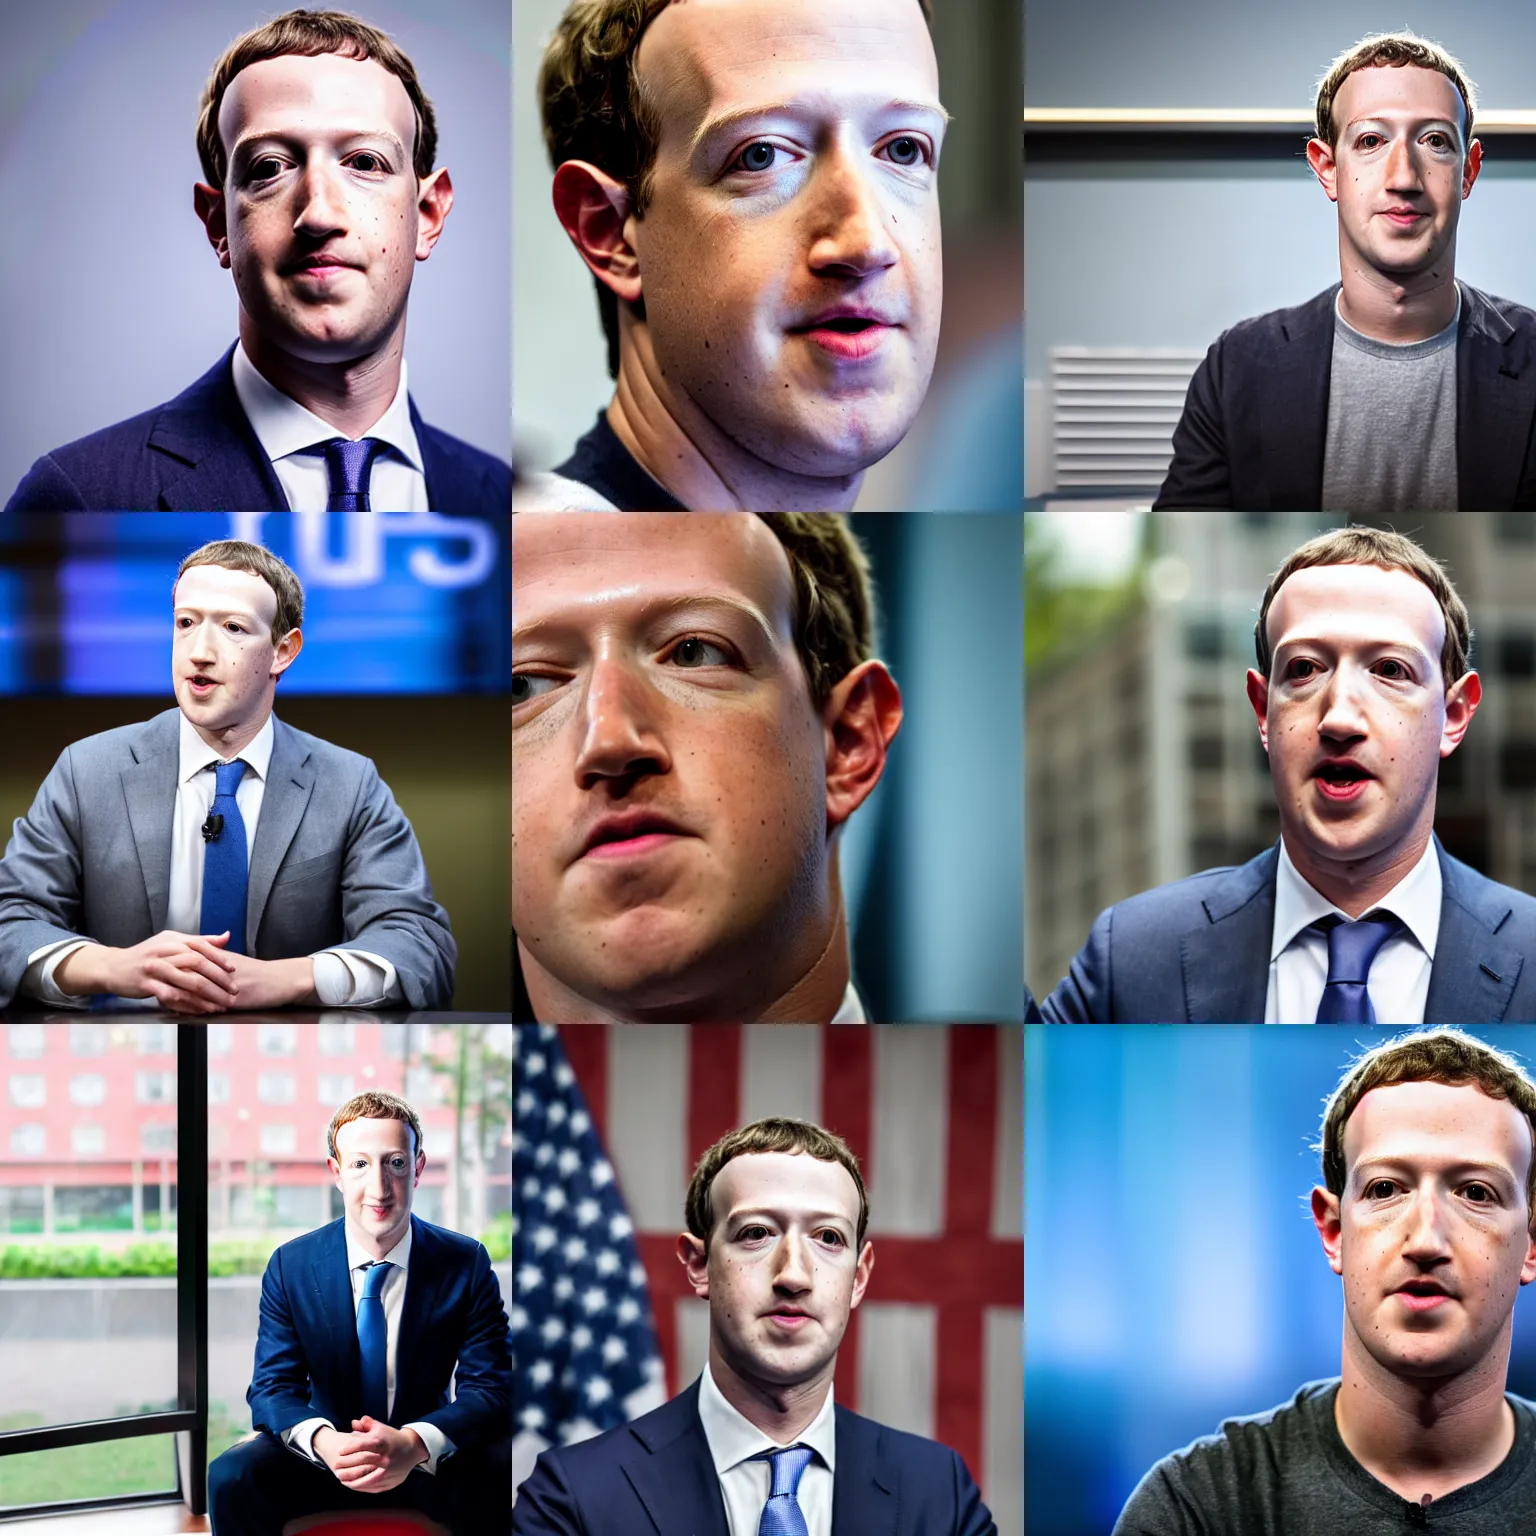 Prompt: headshot of Mark Zuckerberg as the president of the united states being interviewed on CNN, EOS-1D, f/1.4, ISO 200, 1/160s, 8K, RAW, unedited, symmetrical balance, in-frame, Photoshop, Nvidia, Topaz AI